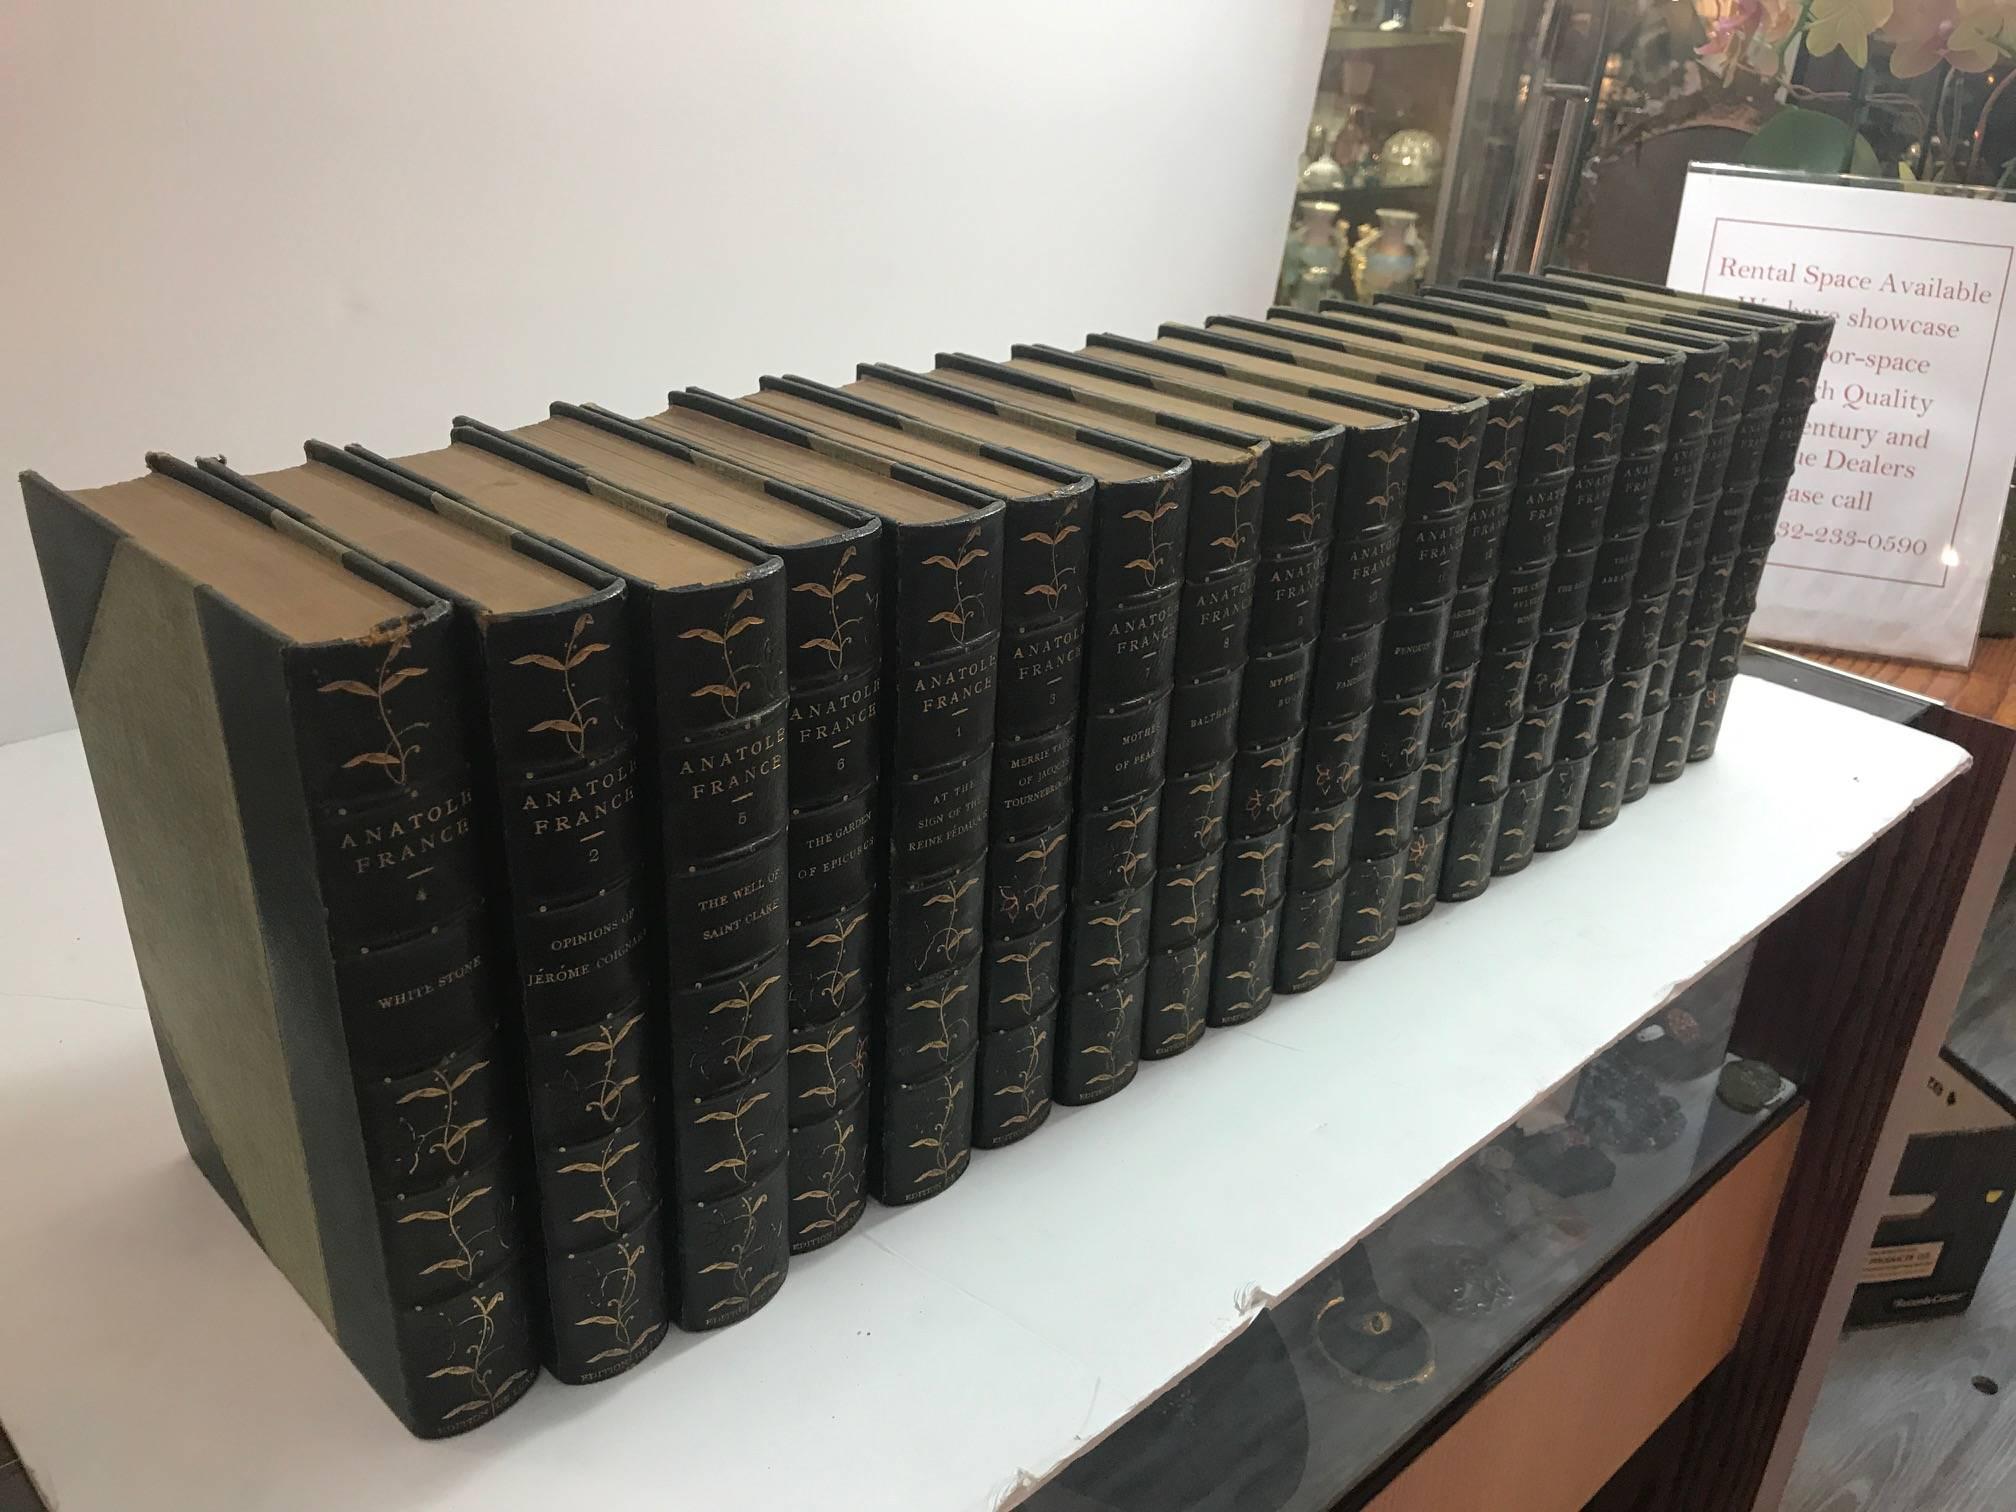 Complete Set of 19 Volumes of Novels and Stories of Anatole, France 3